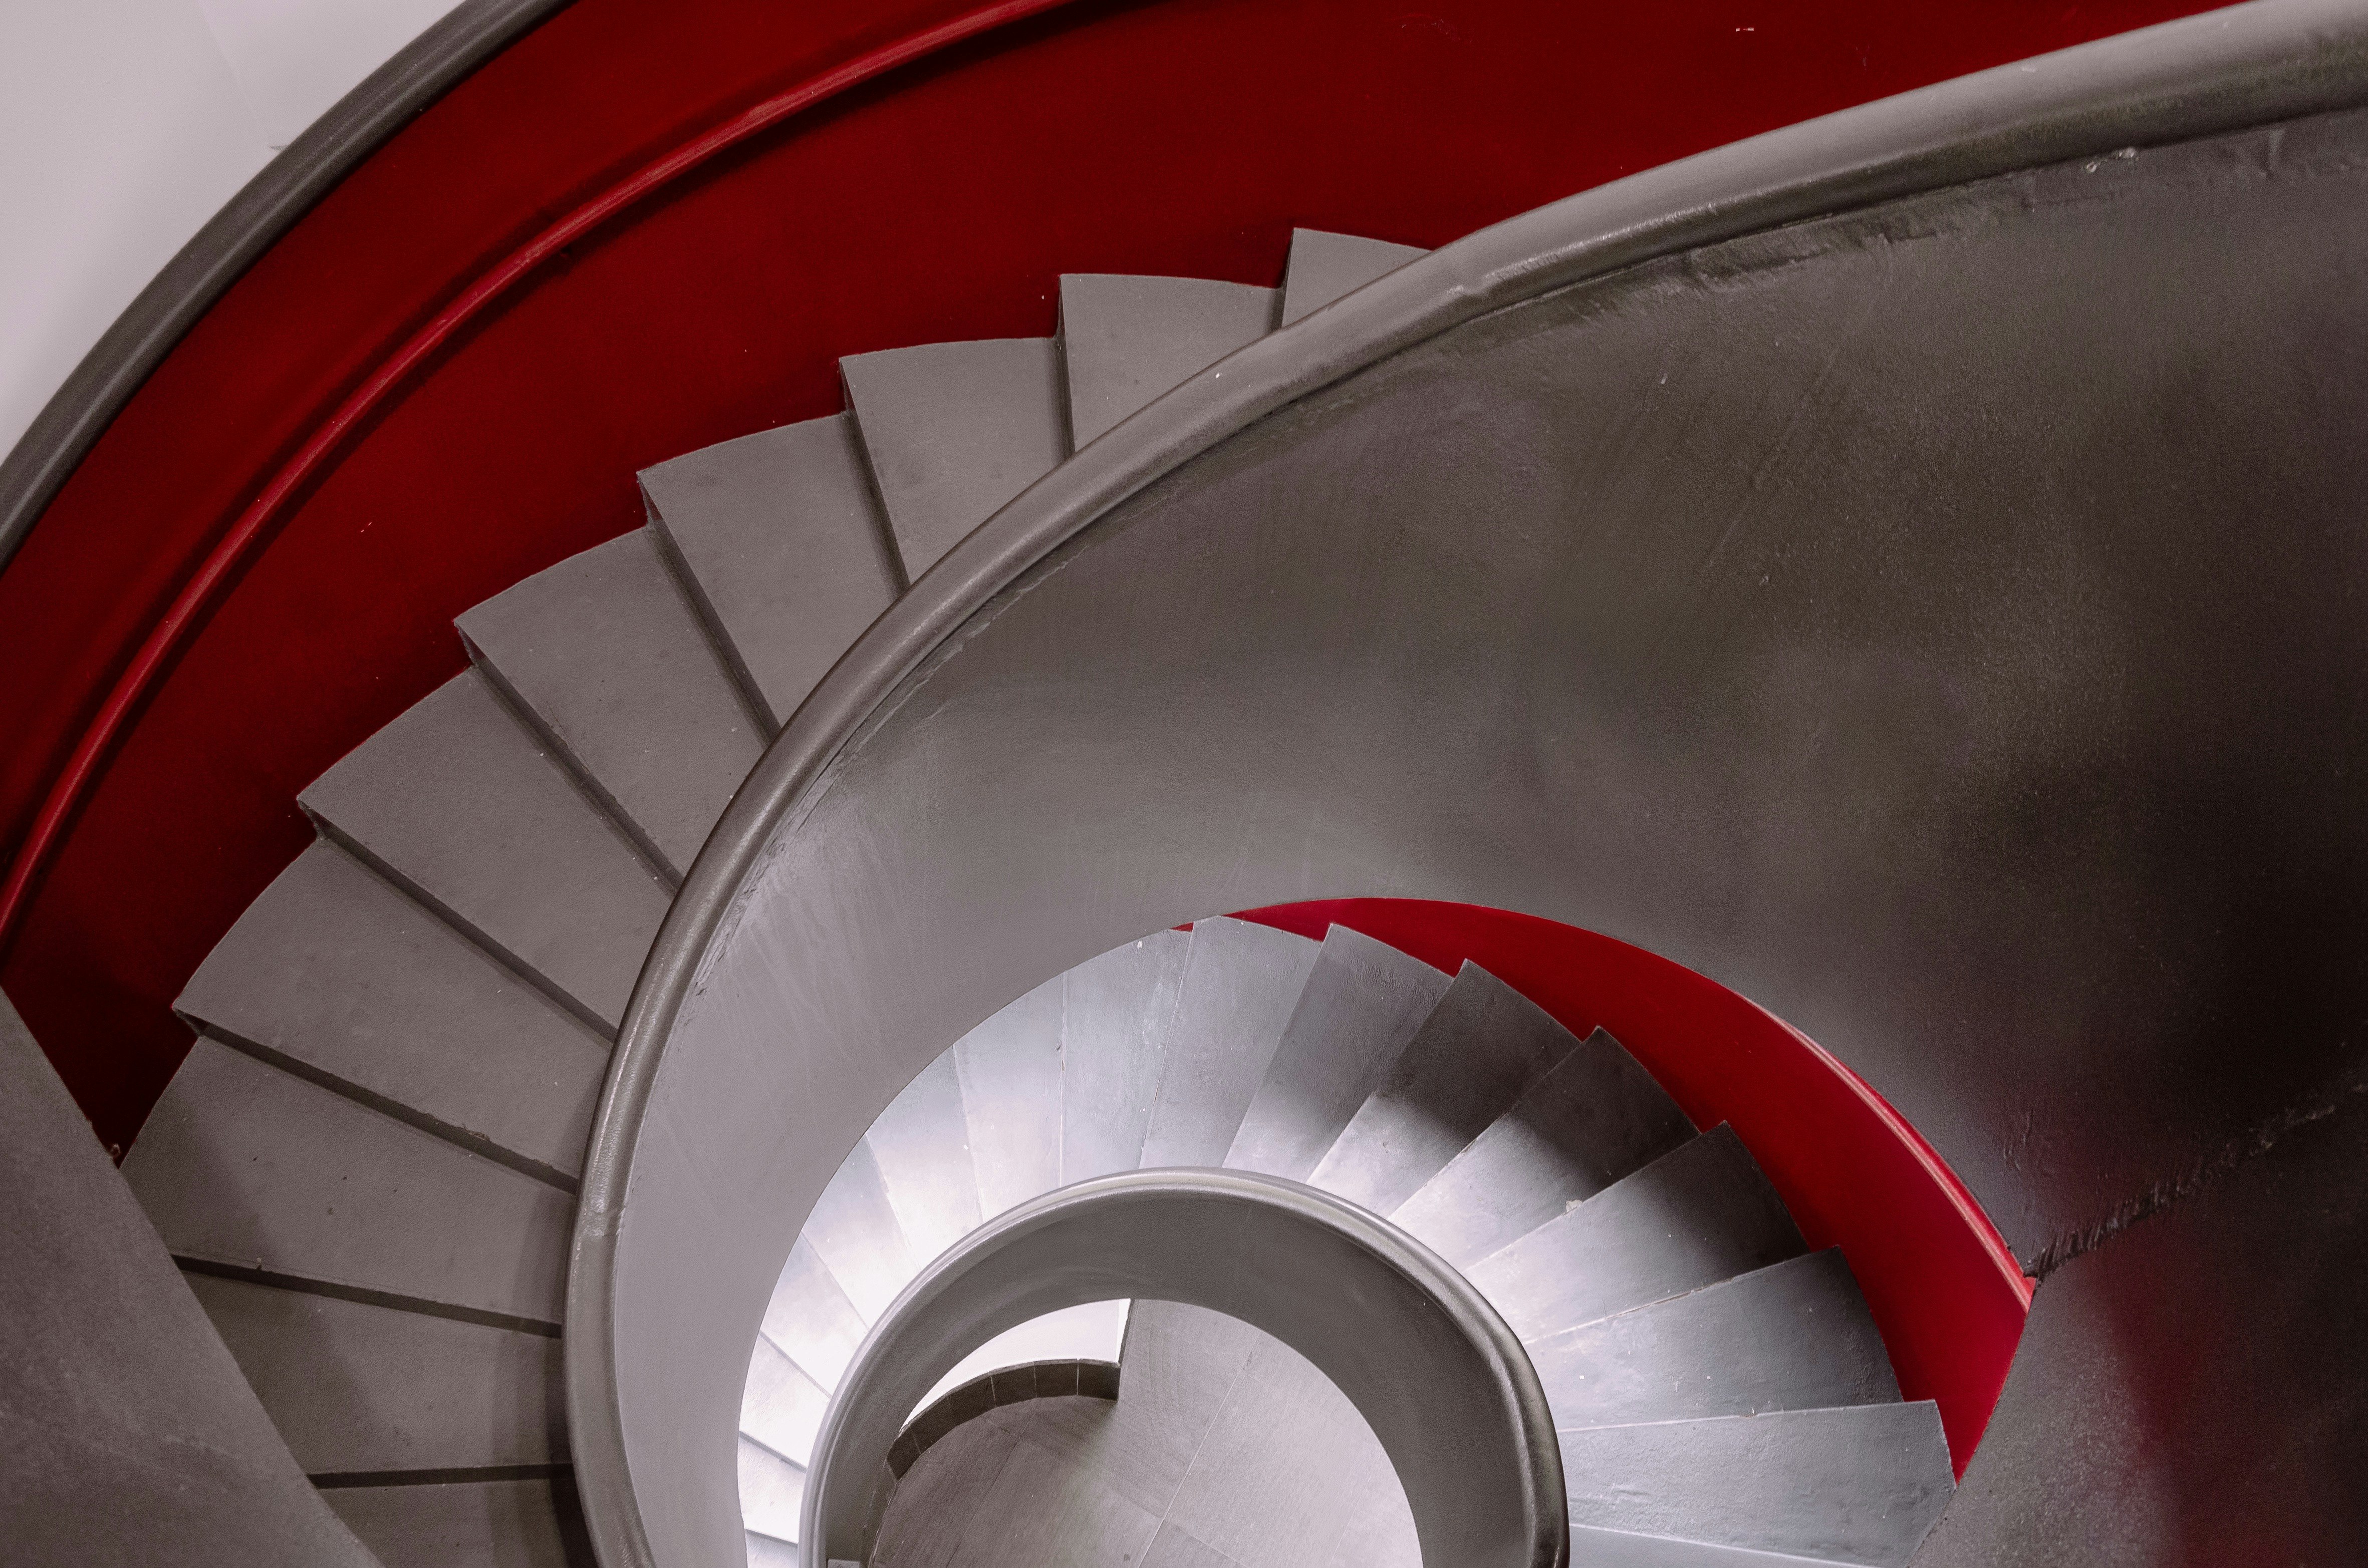 red and white spiral staircase